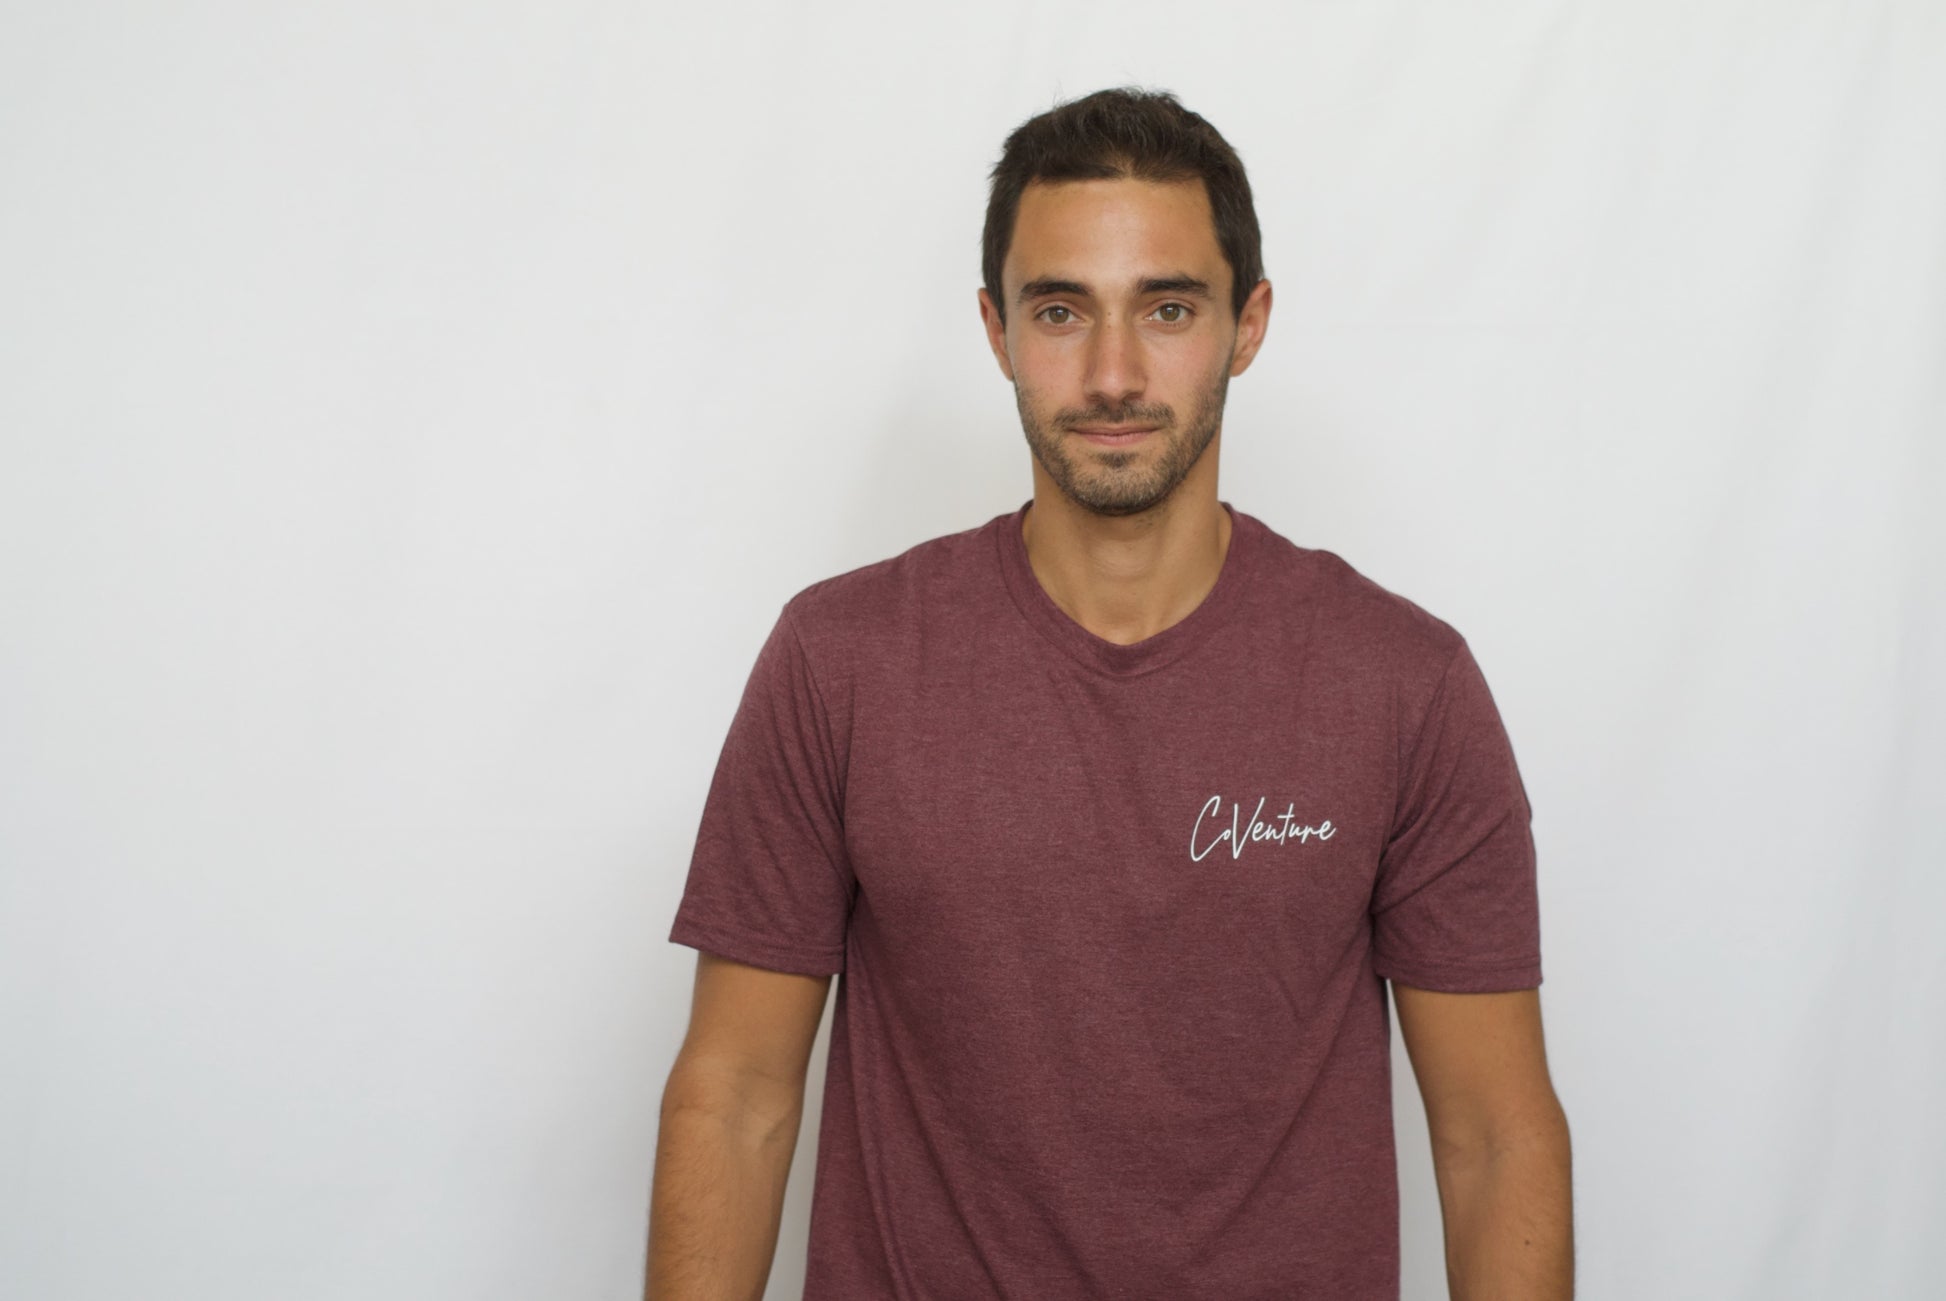 Luxury Goods Co. Signature V-Neck Tee LIMITED EDITION — Luxury Goods Co.